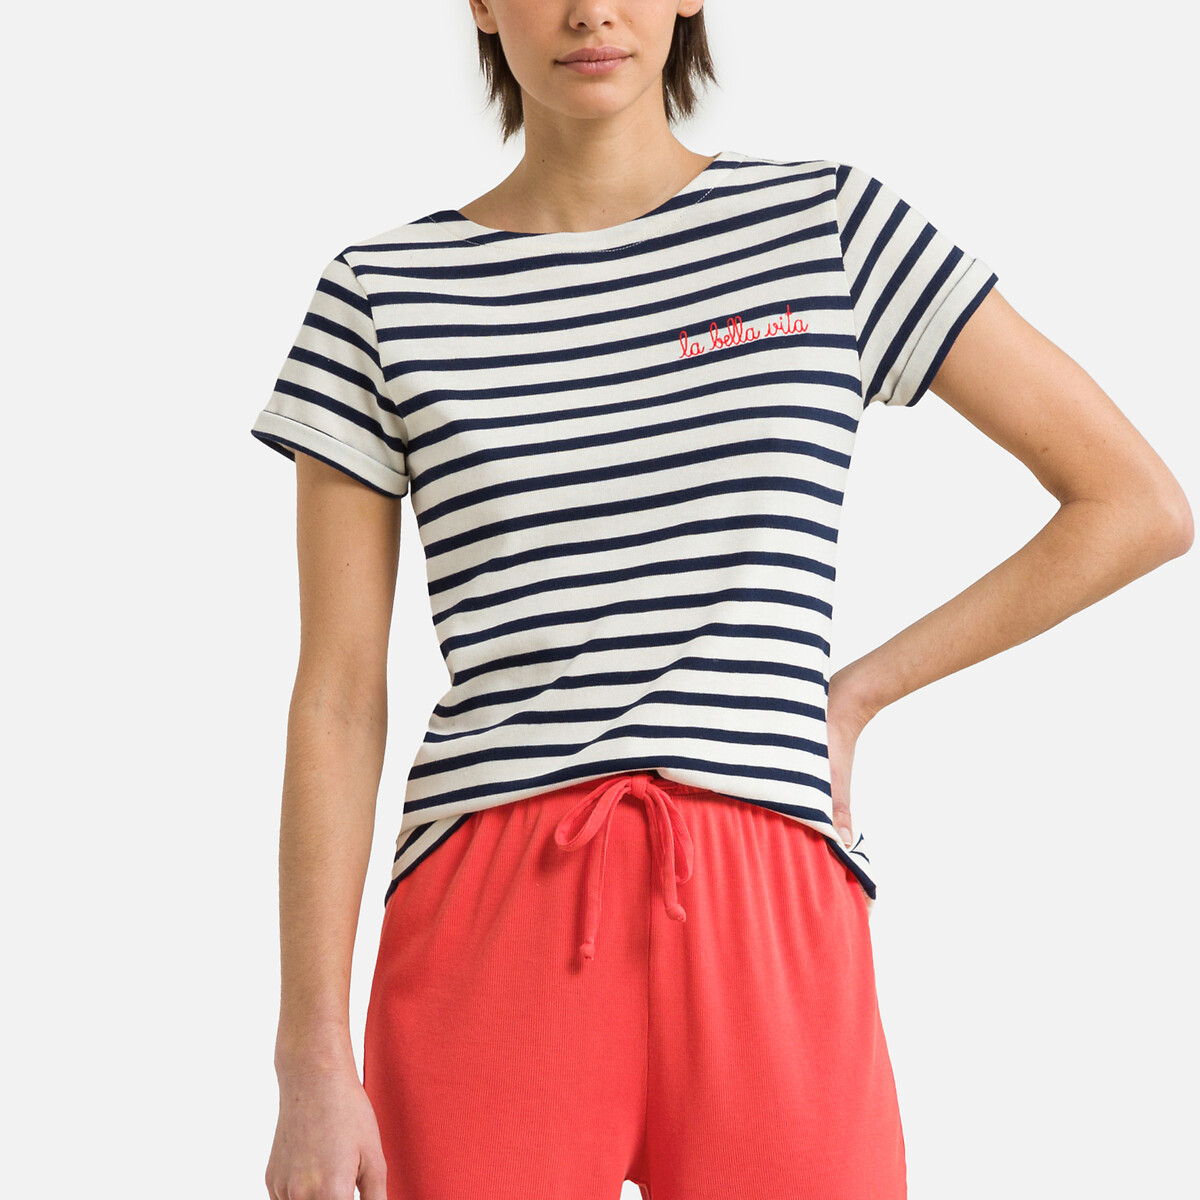 Colombier Organic Cotton T-Shirt in Breton Striped Print with Crew Neck